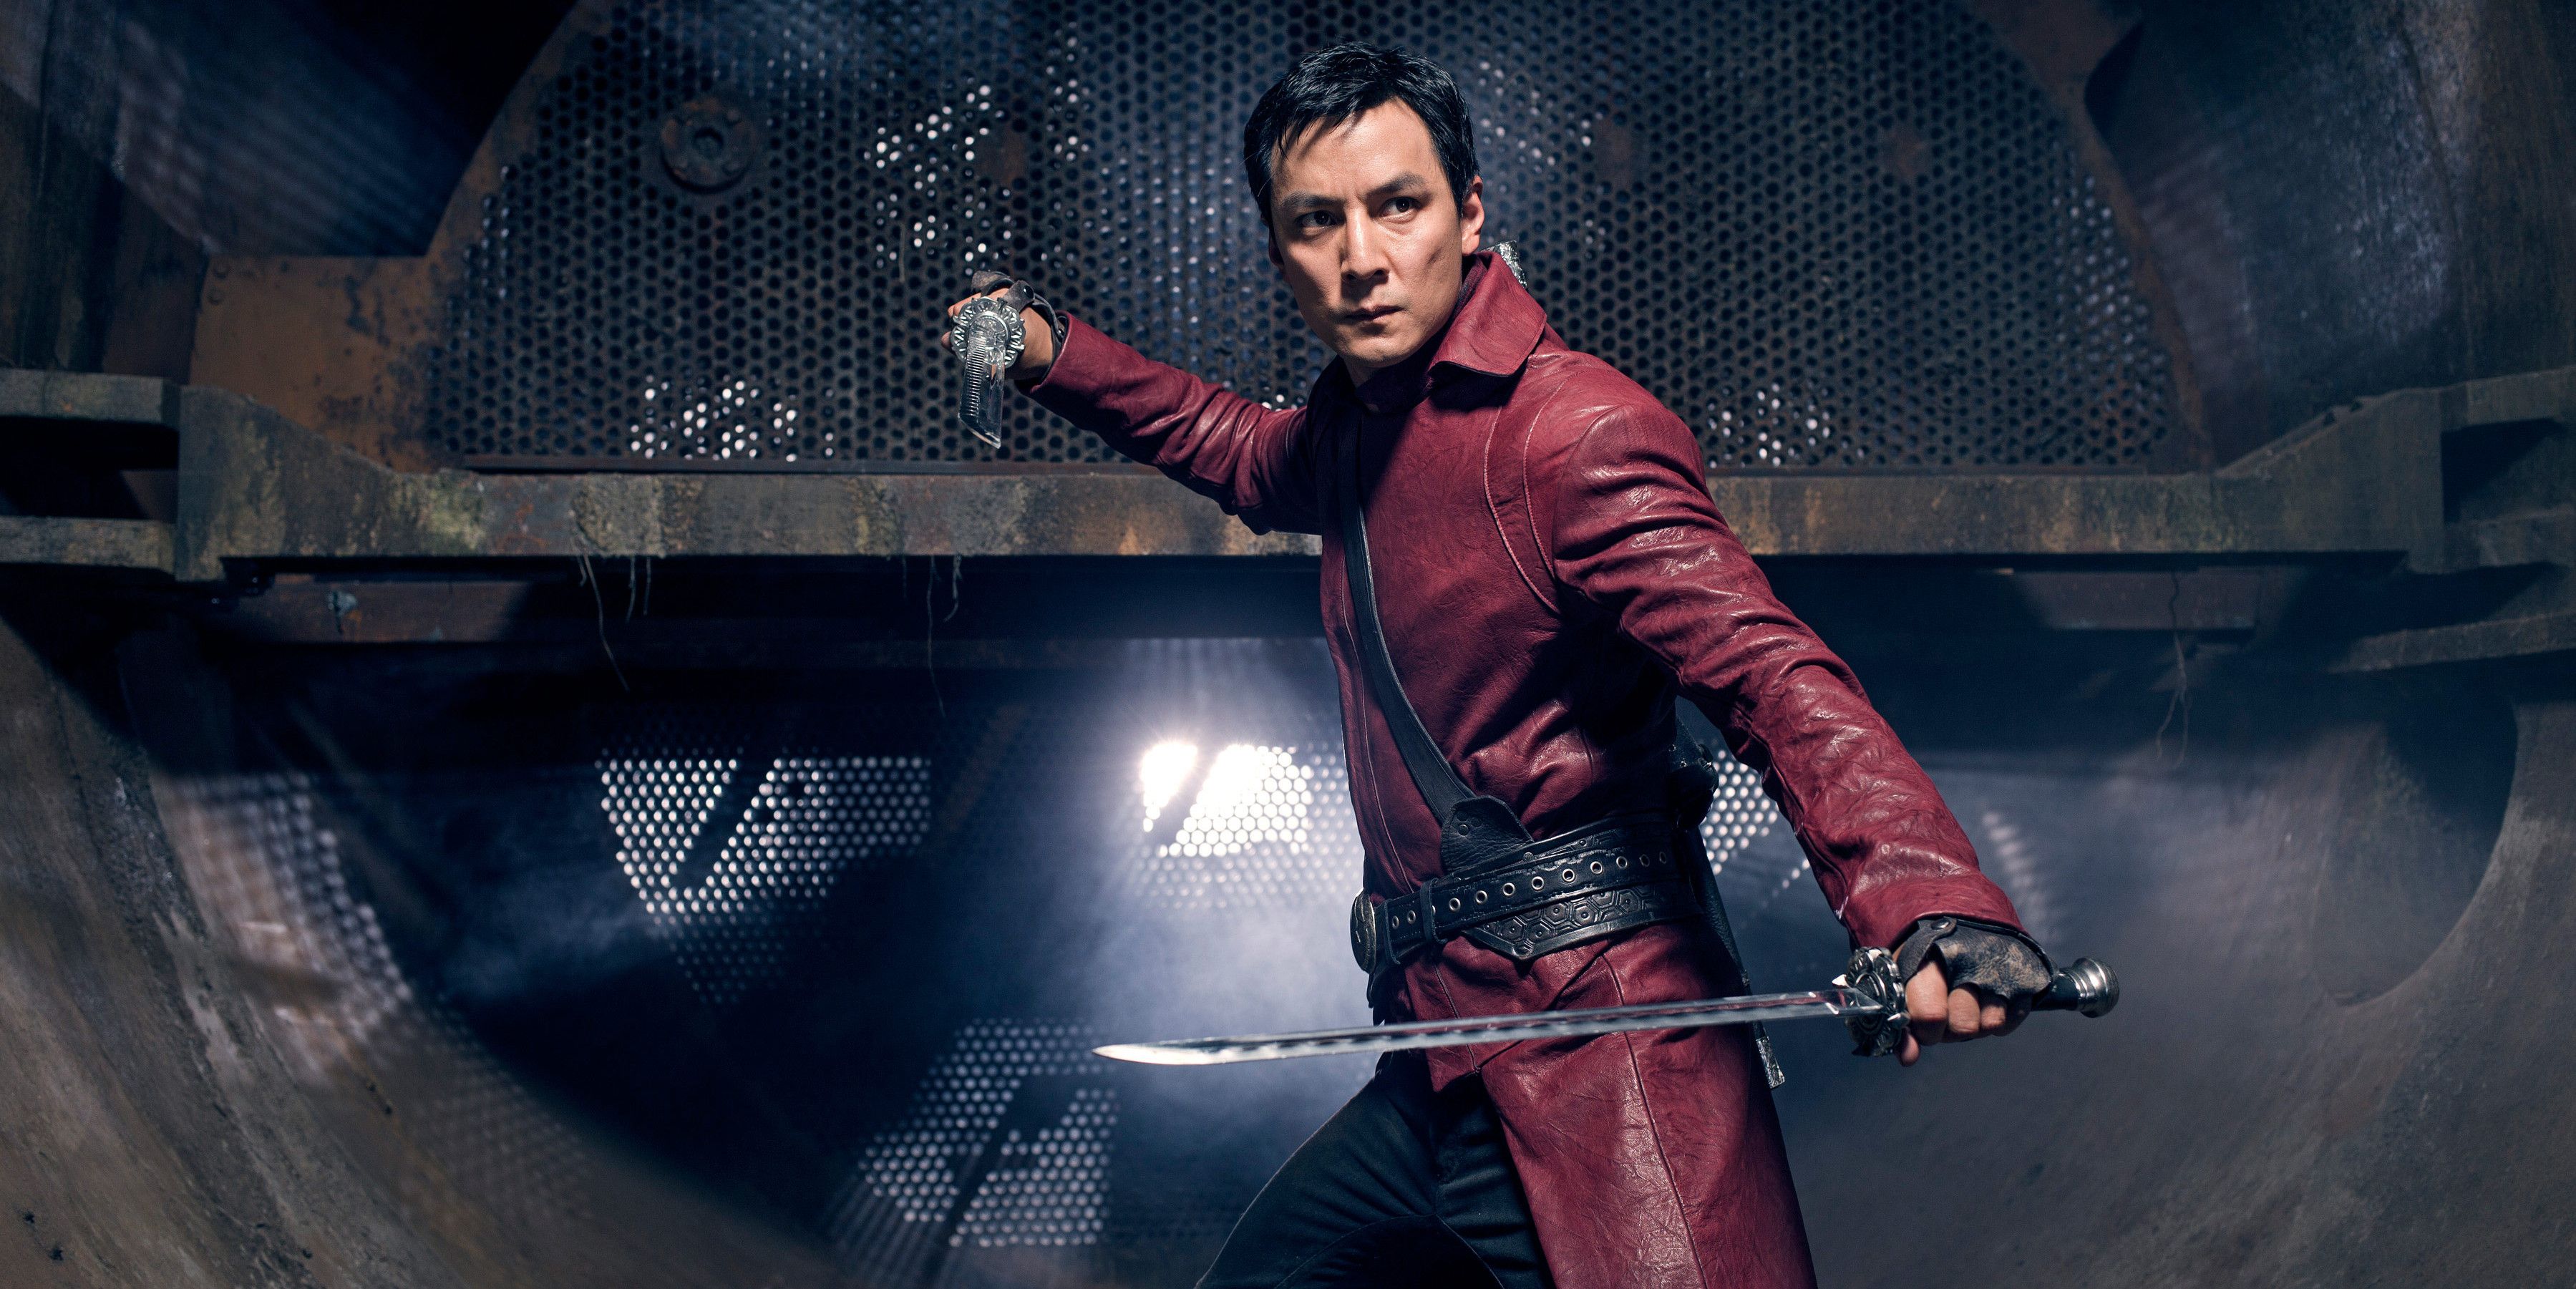 Sunny w/swords on Into The Badlands